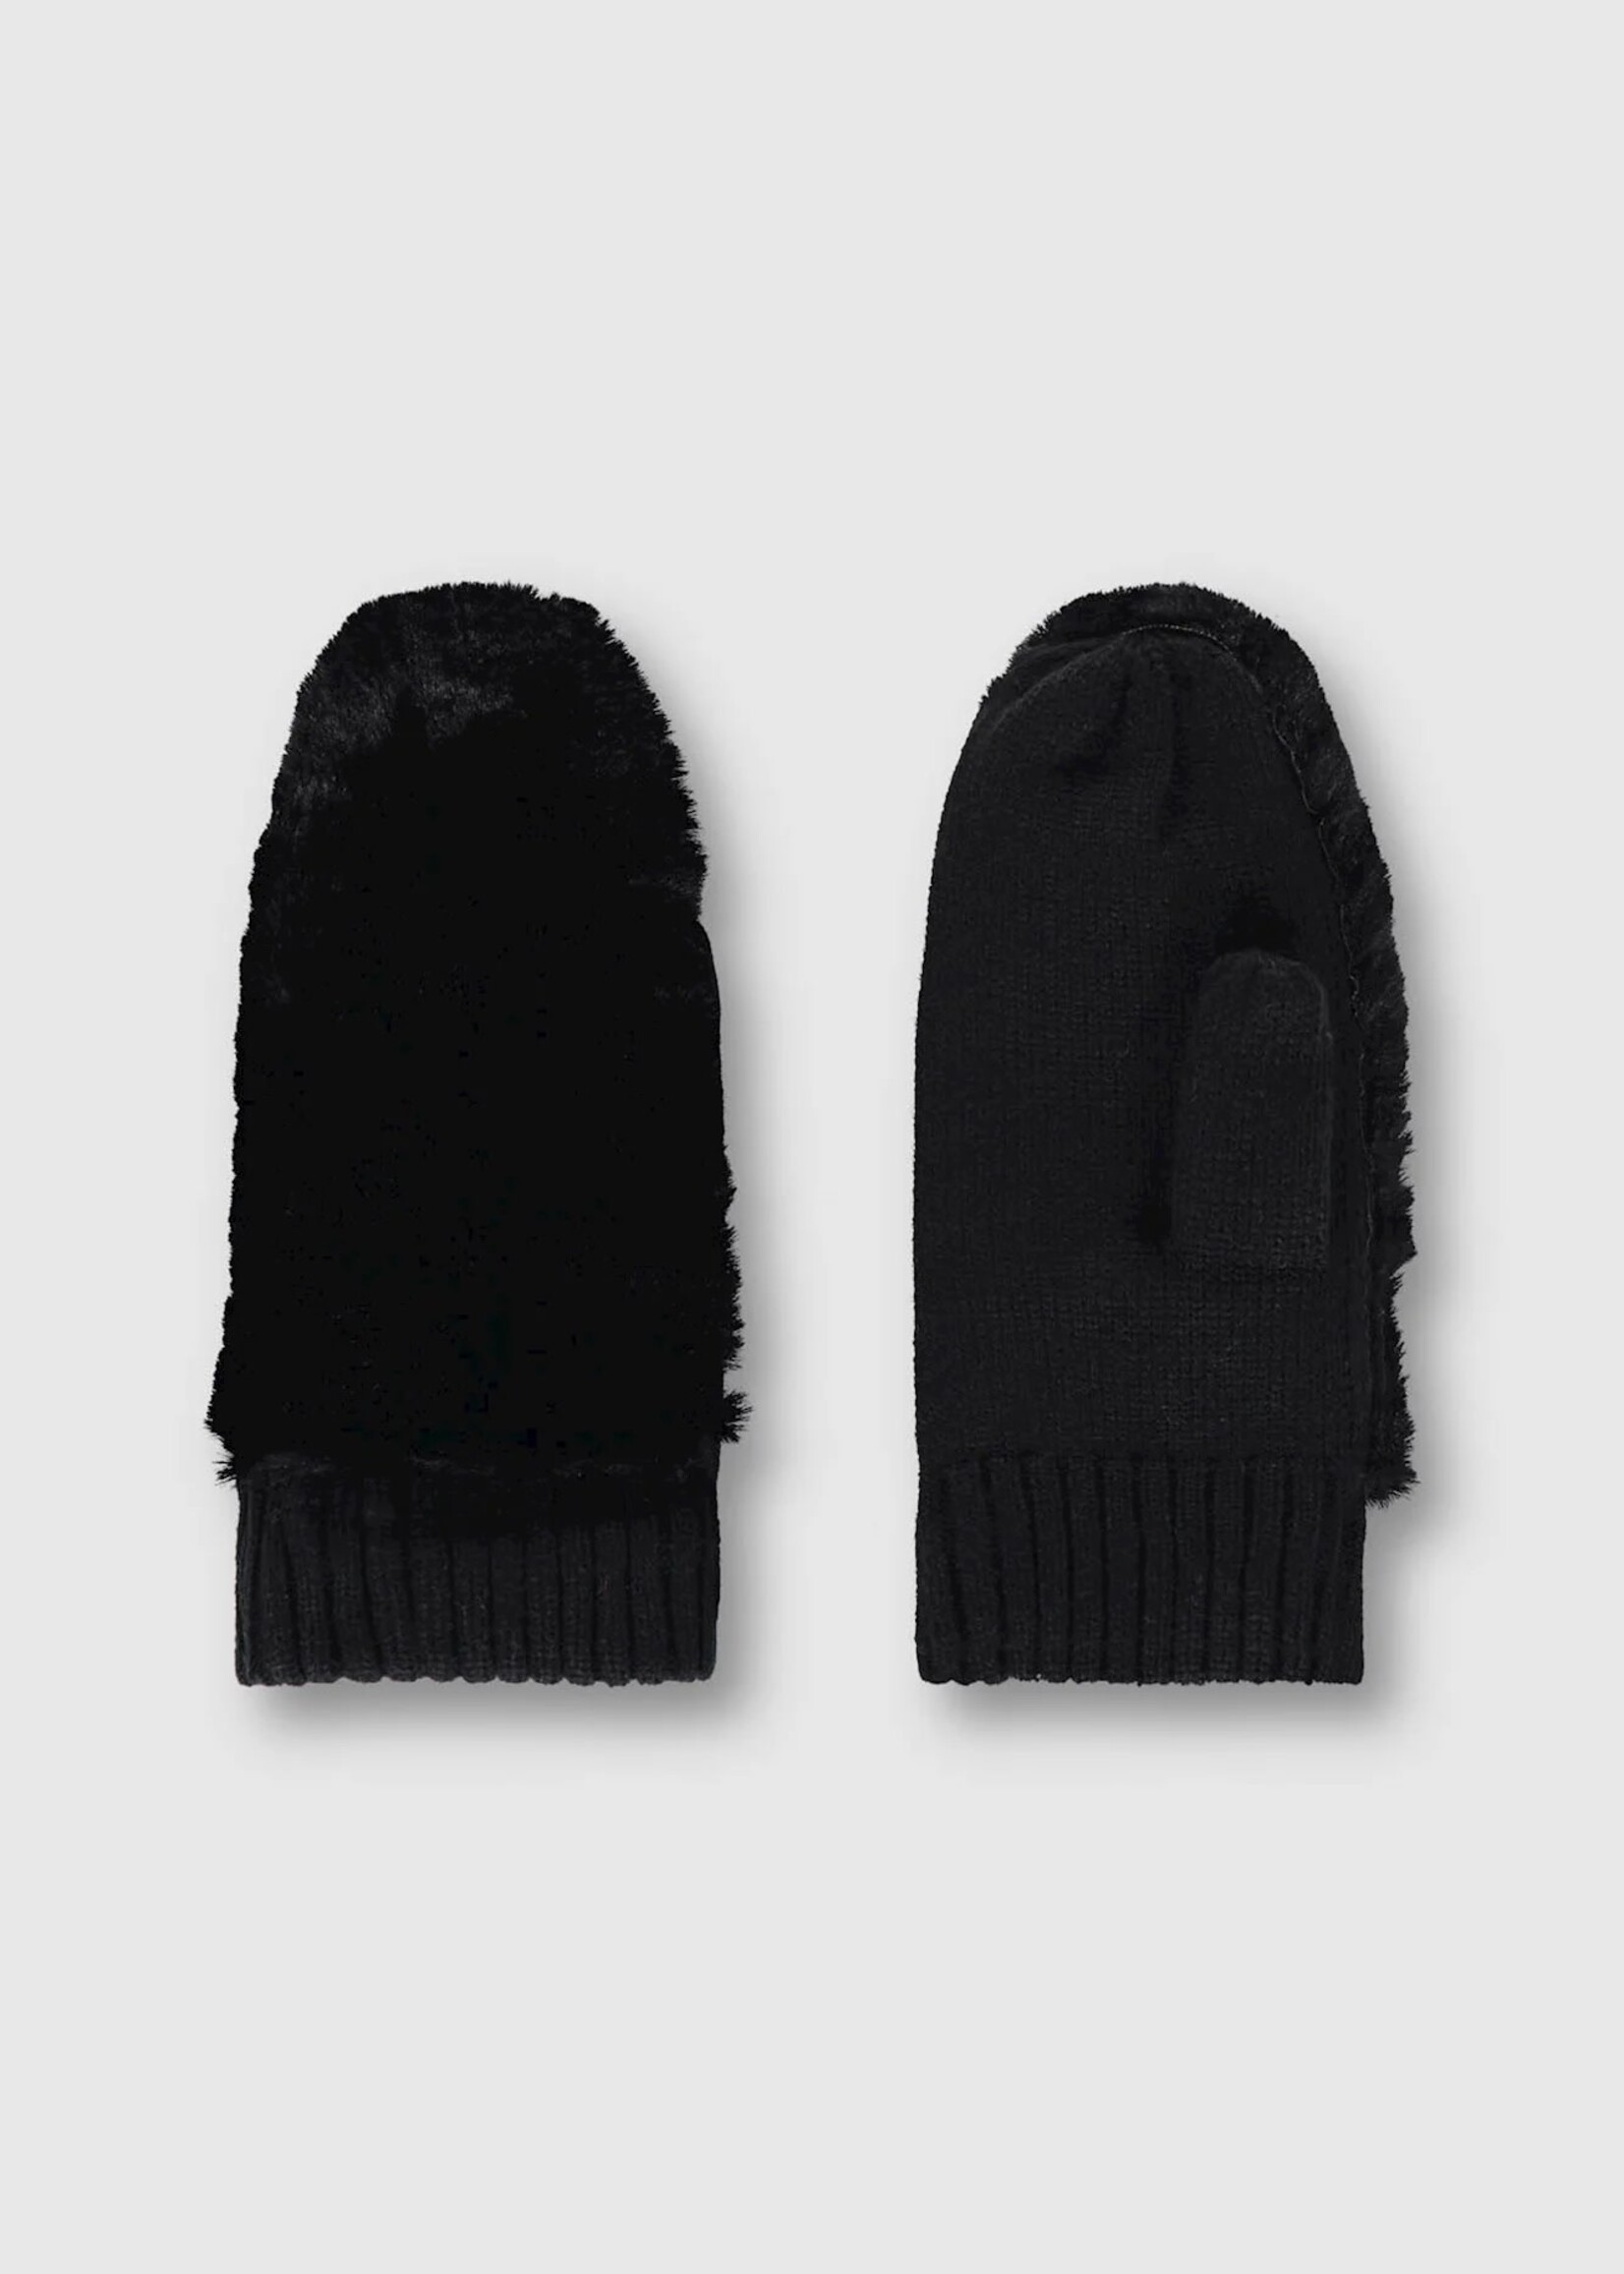 Rino & Pelle OXO Mittens with Faux Fur